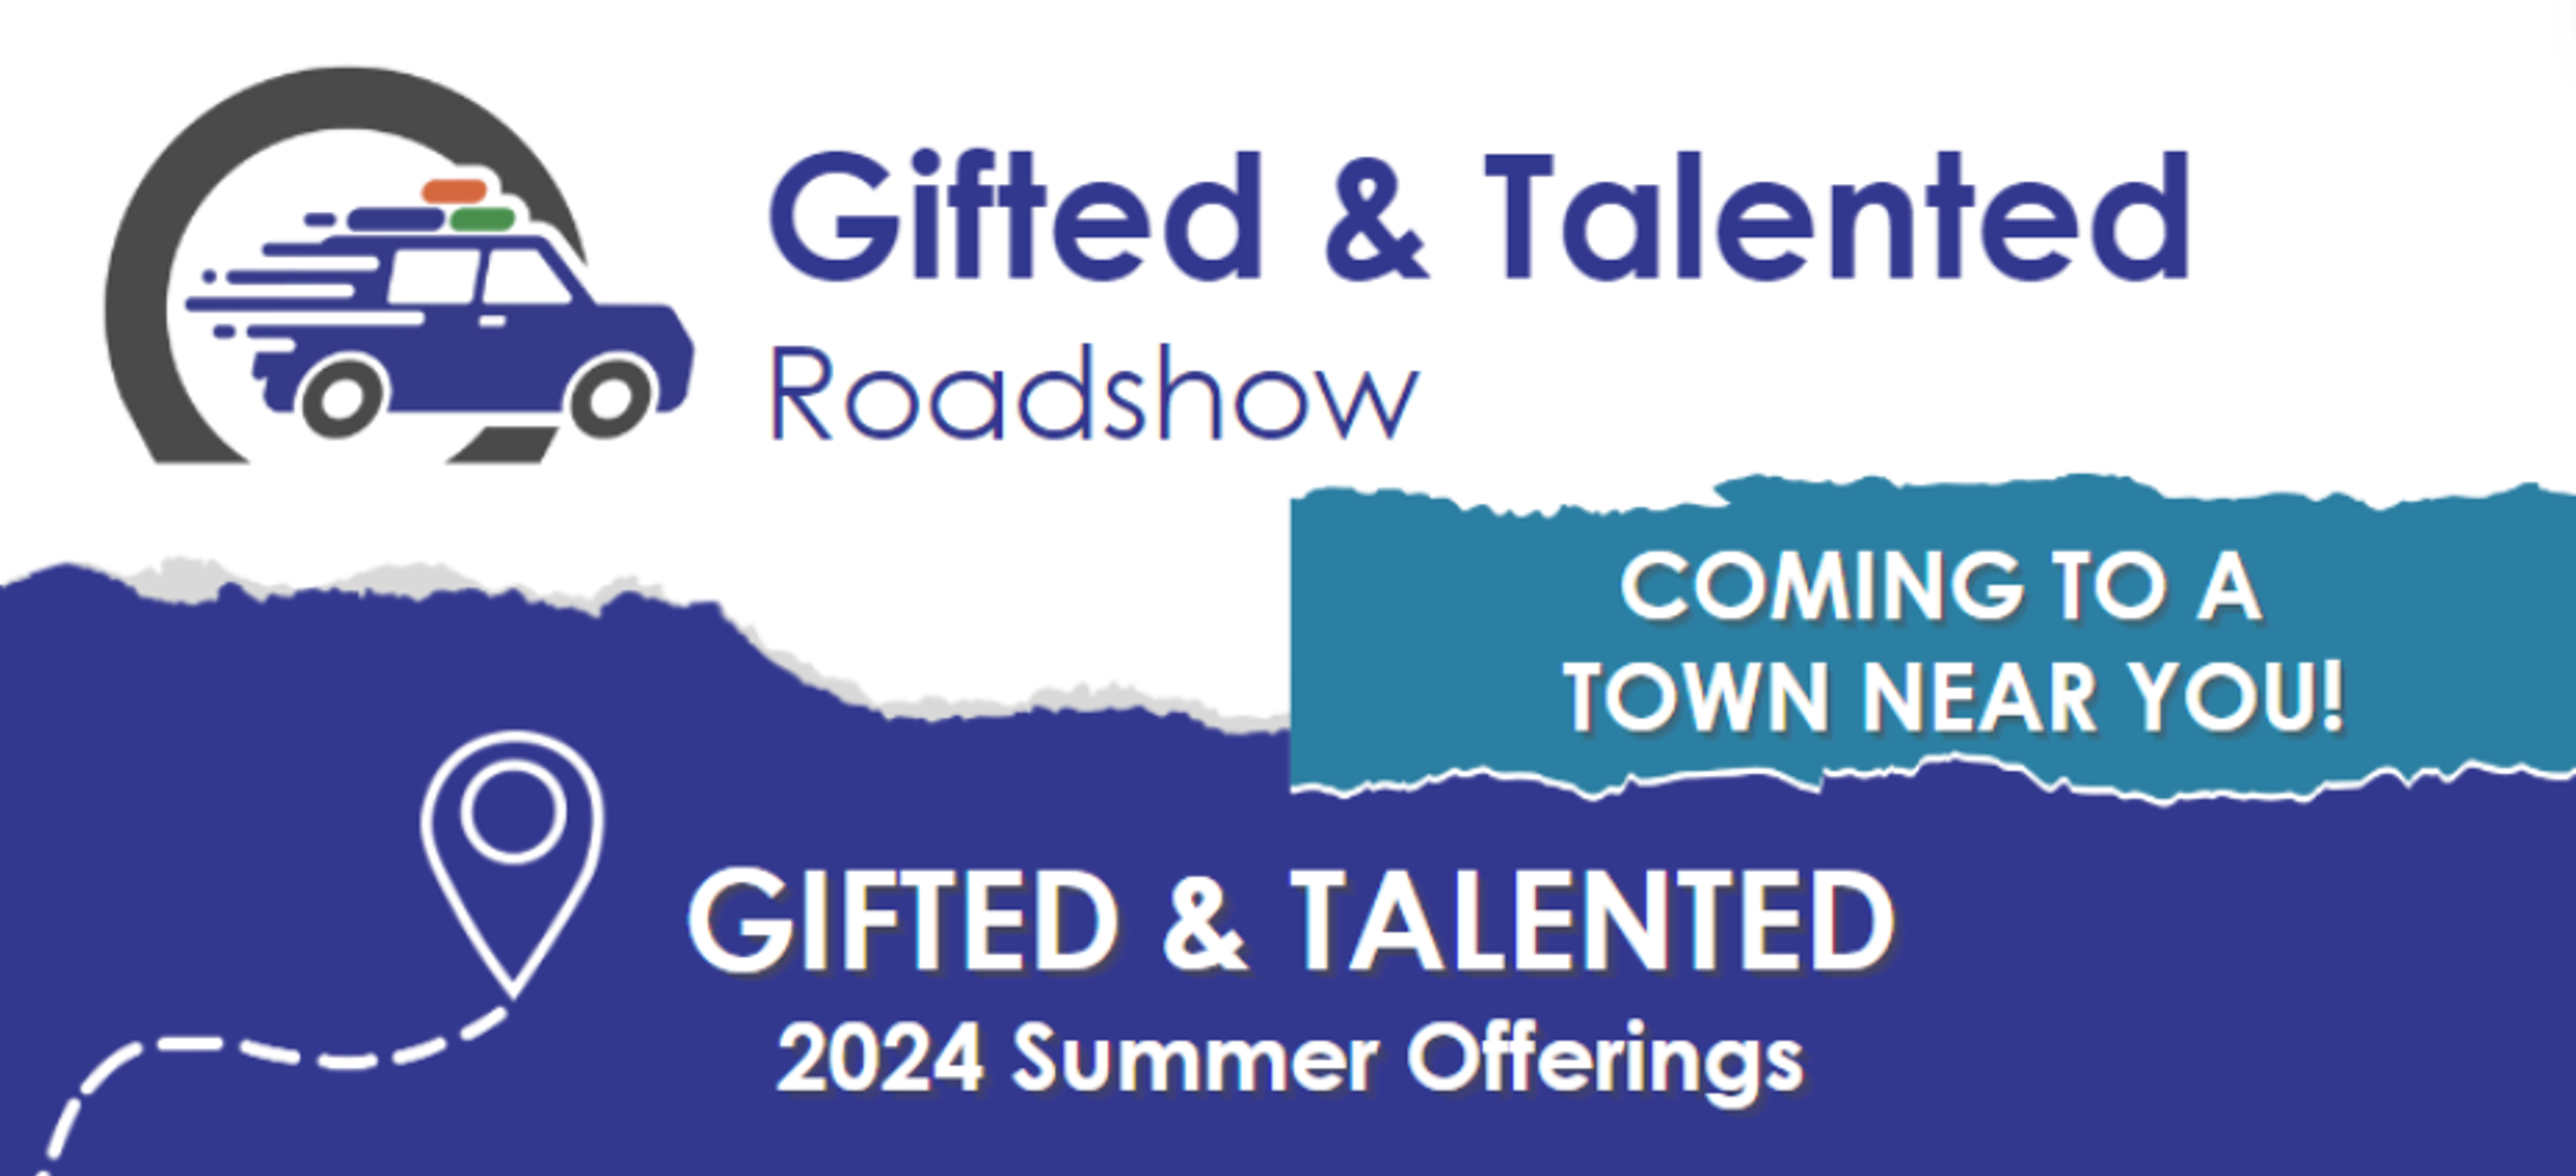 Gifted and Talented Roadshow 2024 Summer Offerings - Coming to a town near you!